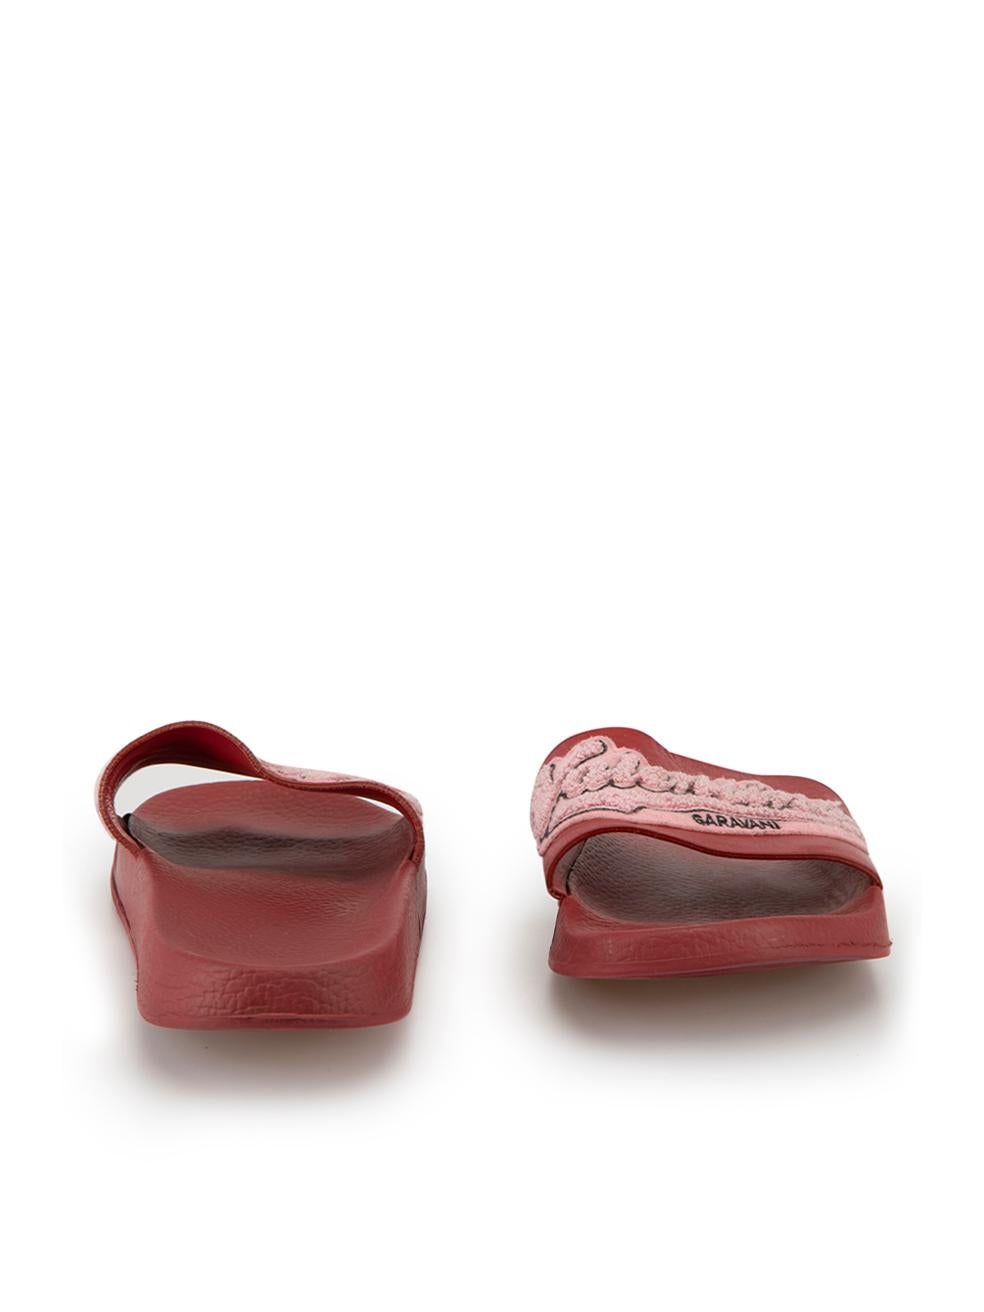 Valentino Red Logo Patch Rubber Slides Size IT 38 In Good Condition For Sale In London, GB